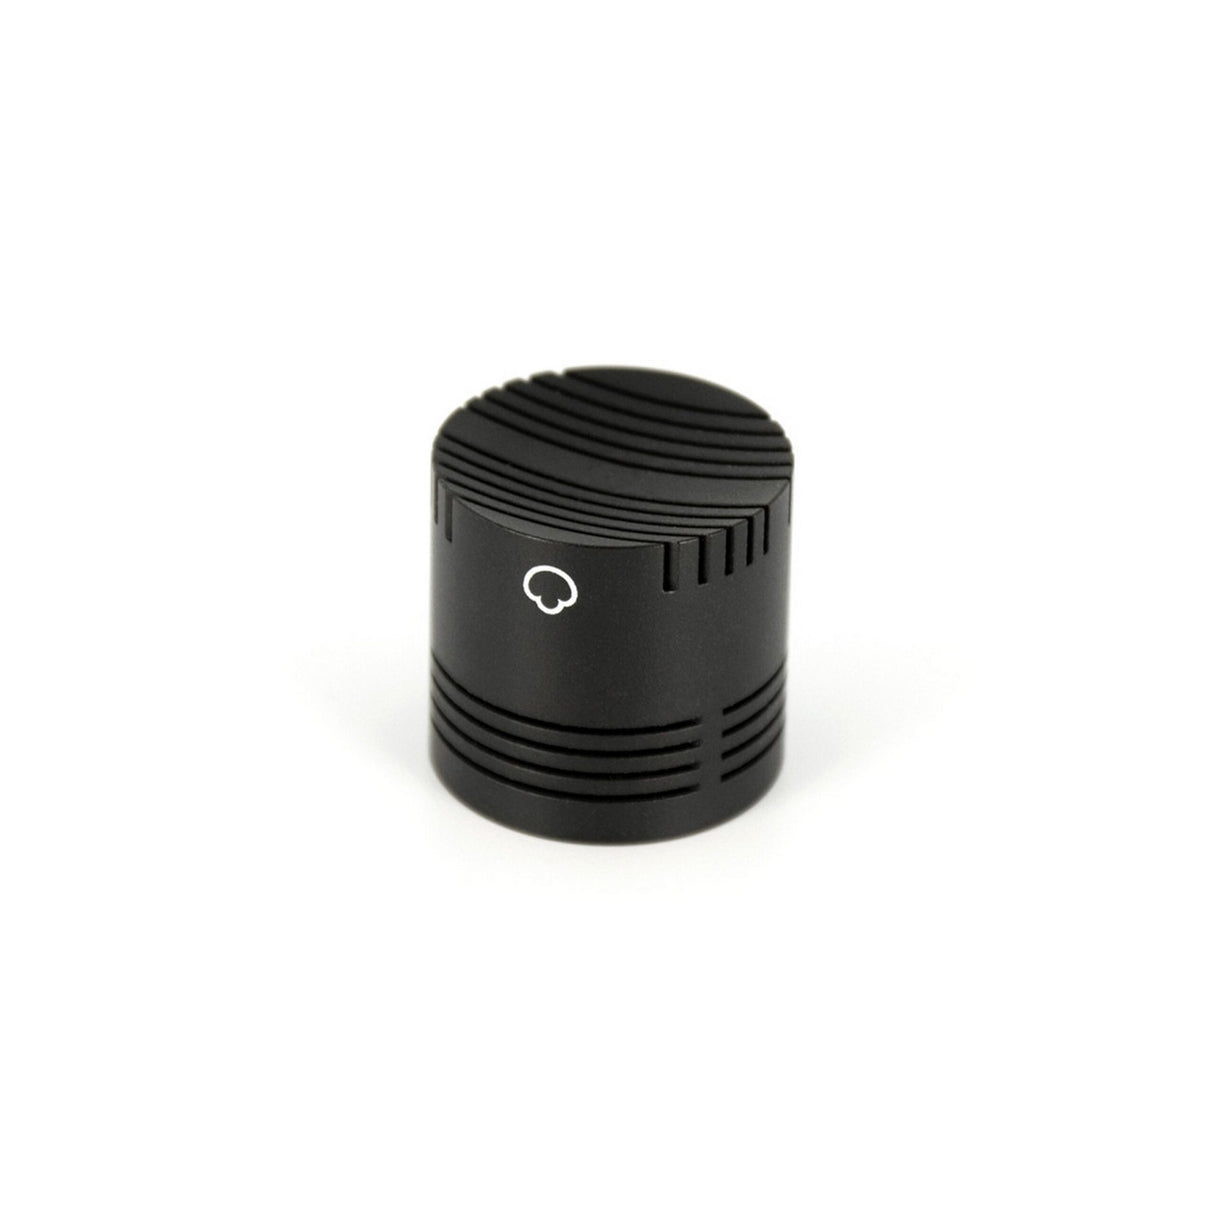 Milab VM-44 Replacement Supercardioid Capsule for VM-44